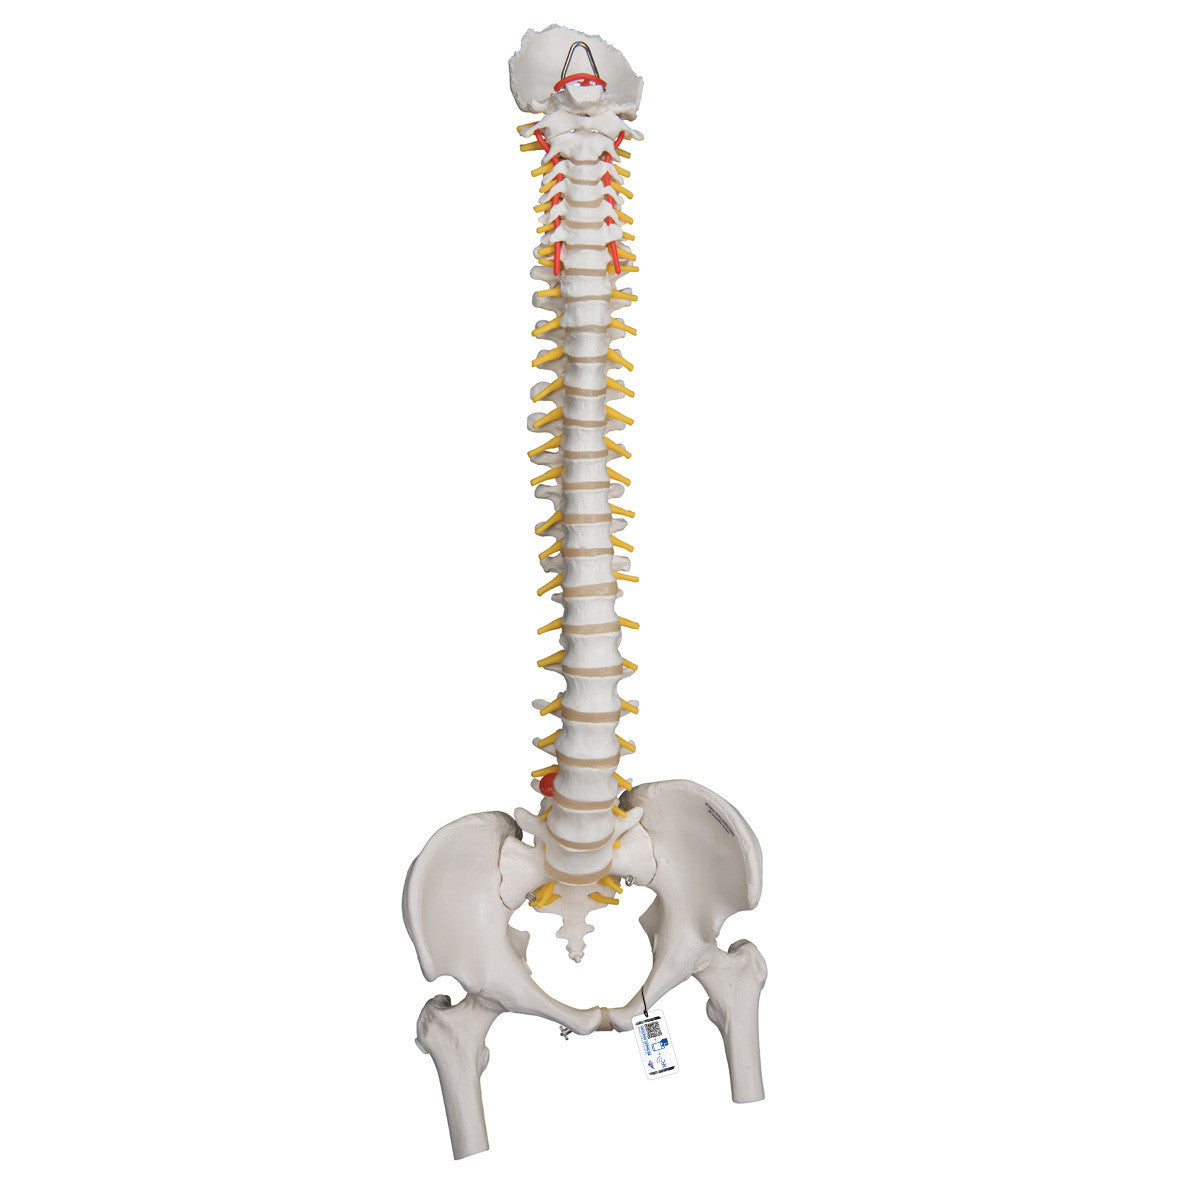 a59-2_01_1200_1200_highly-flexible-human-spine-model-mounted-on-a-flexible-core-with-femur-heads-3b-smart-anatomy__85342.1589753021.1280.1280.jpg